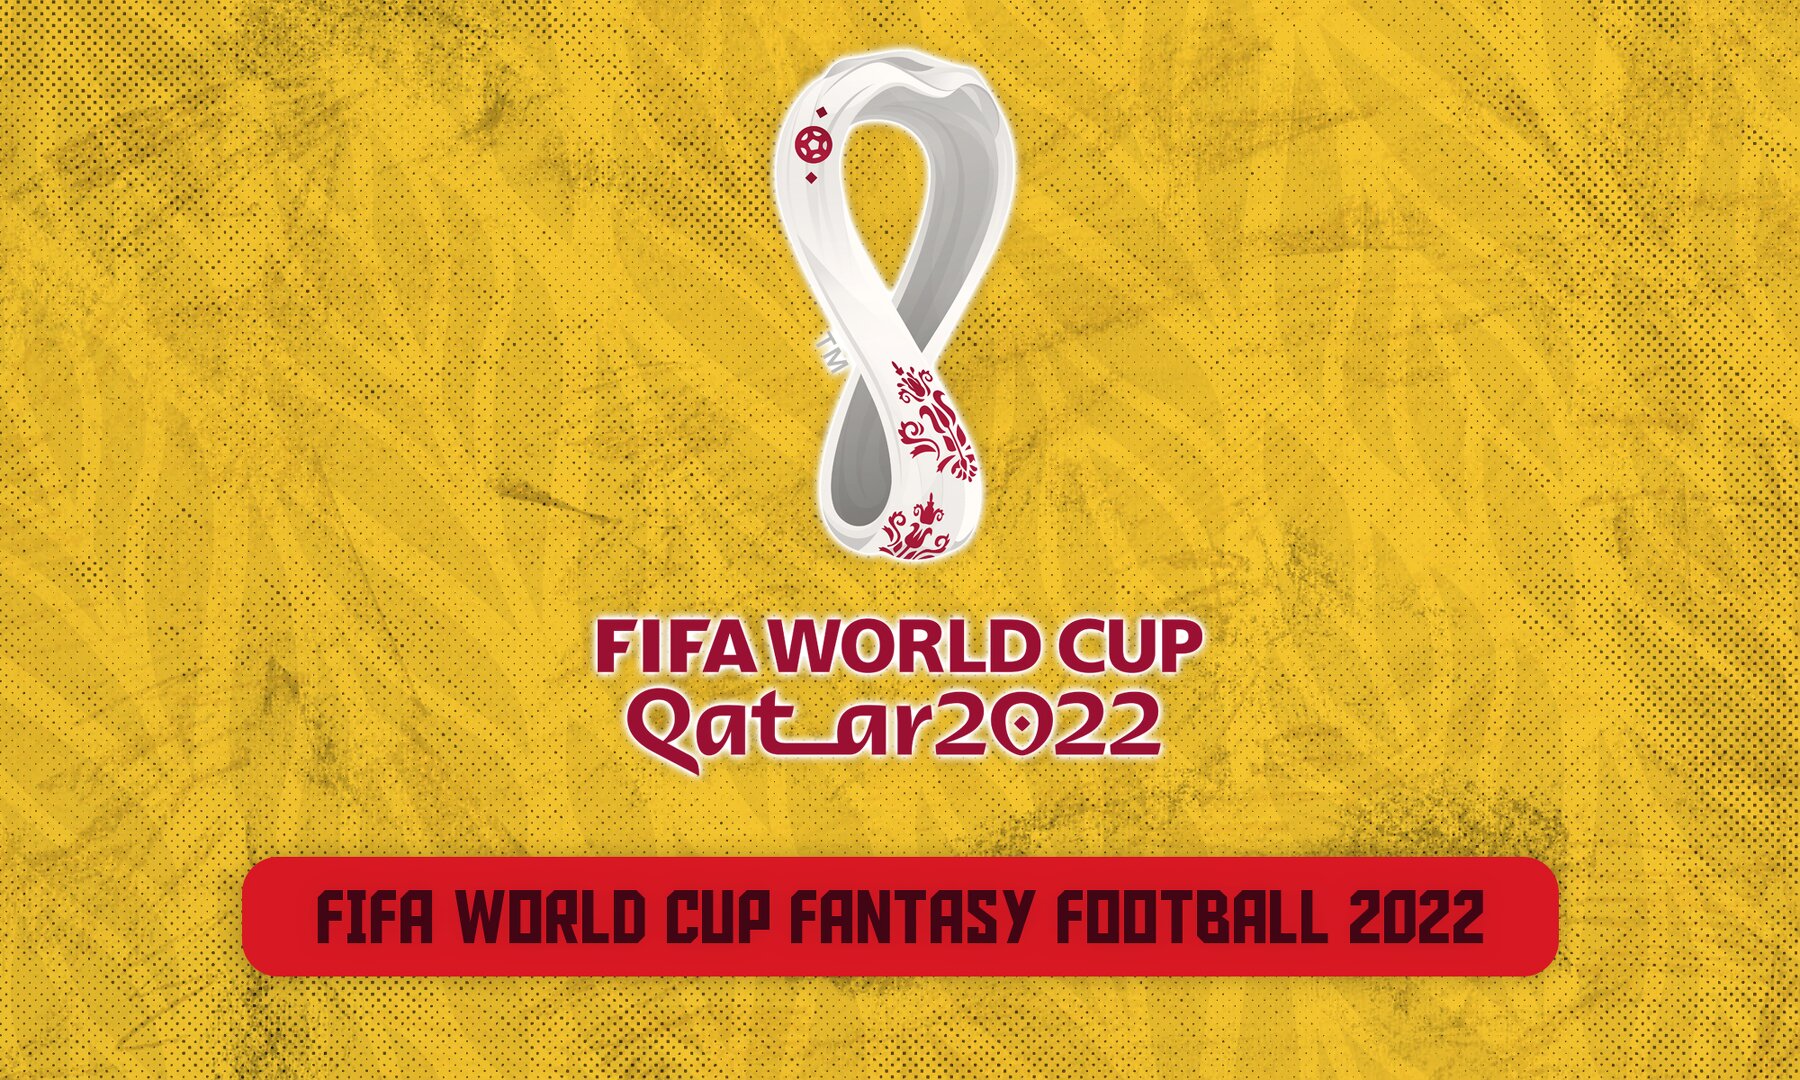 FIFA World Cup fantasy football 2022 Explained: Transfers, point scoring, and more